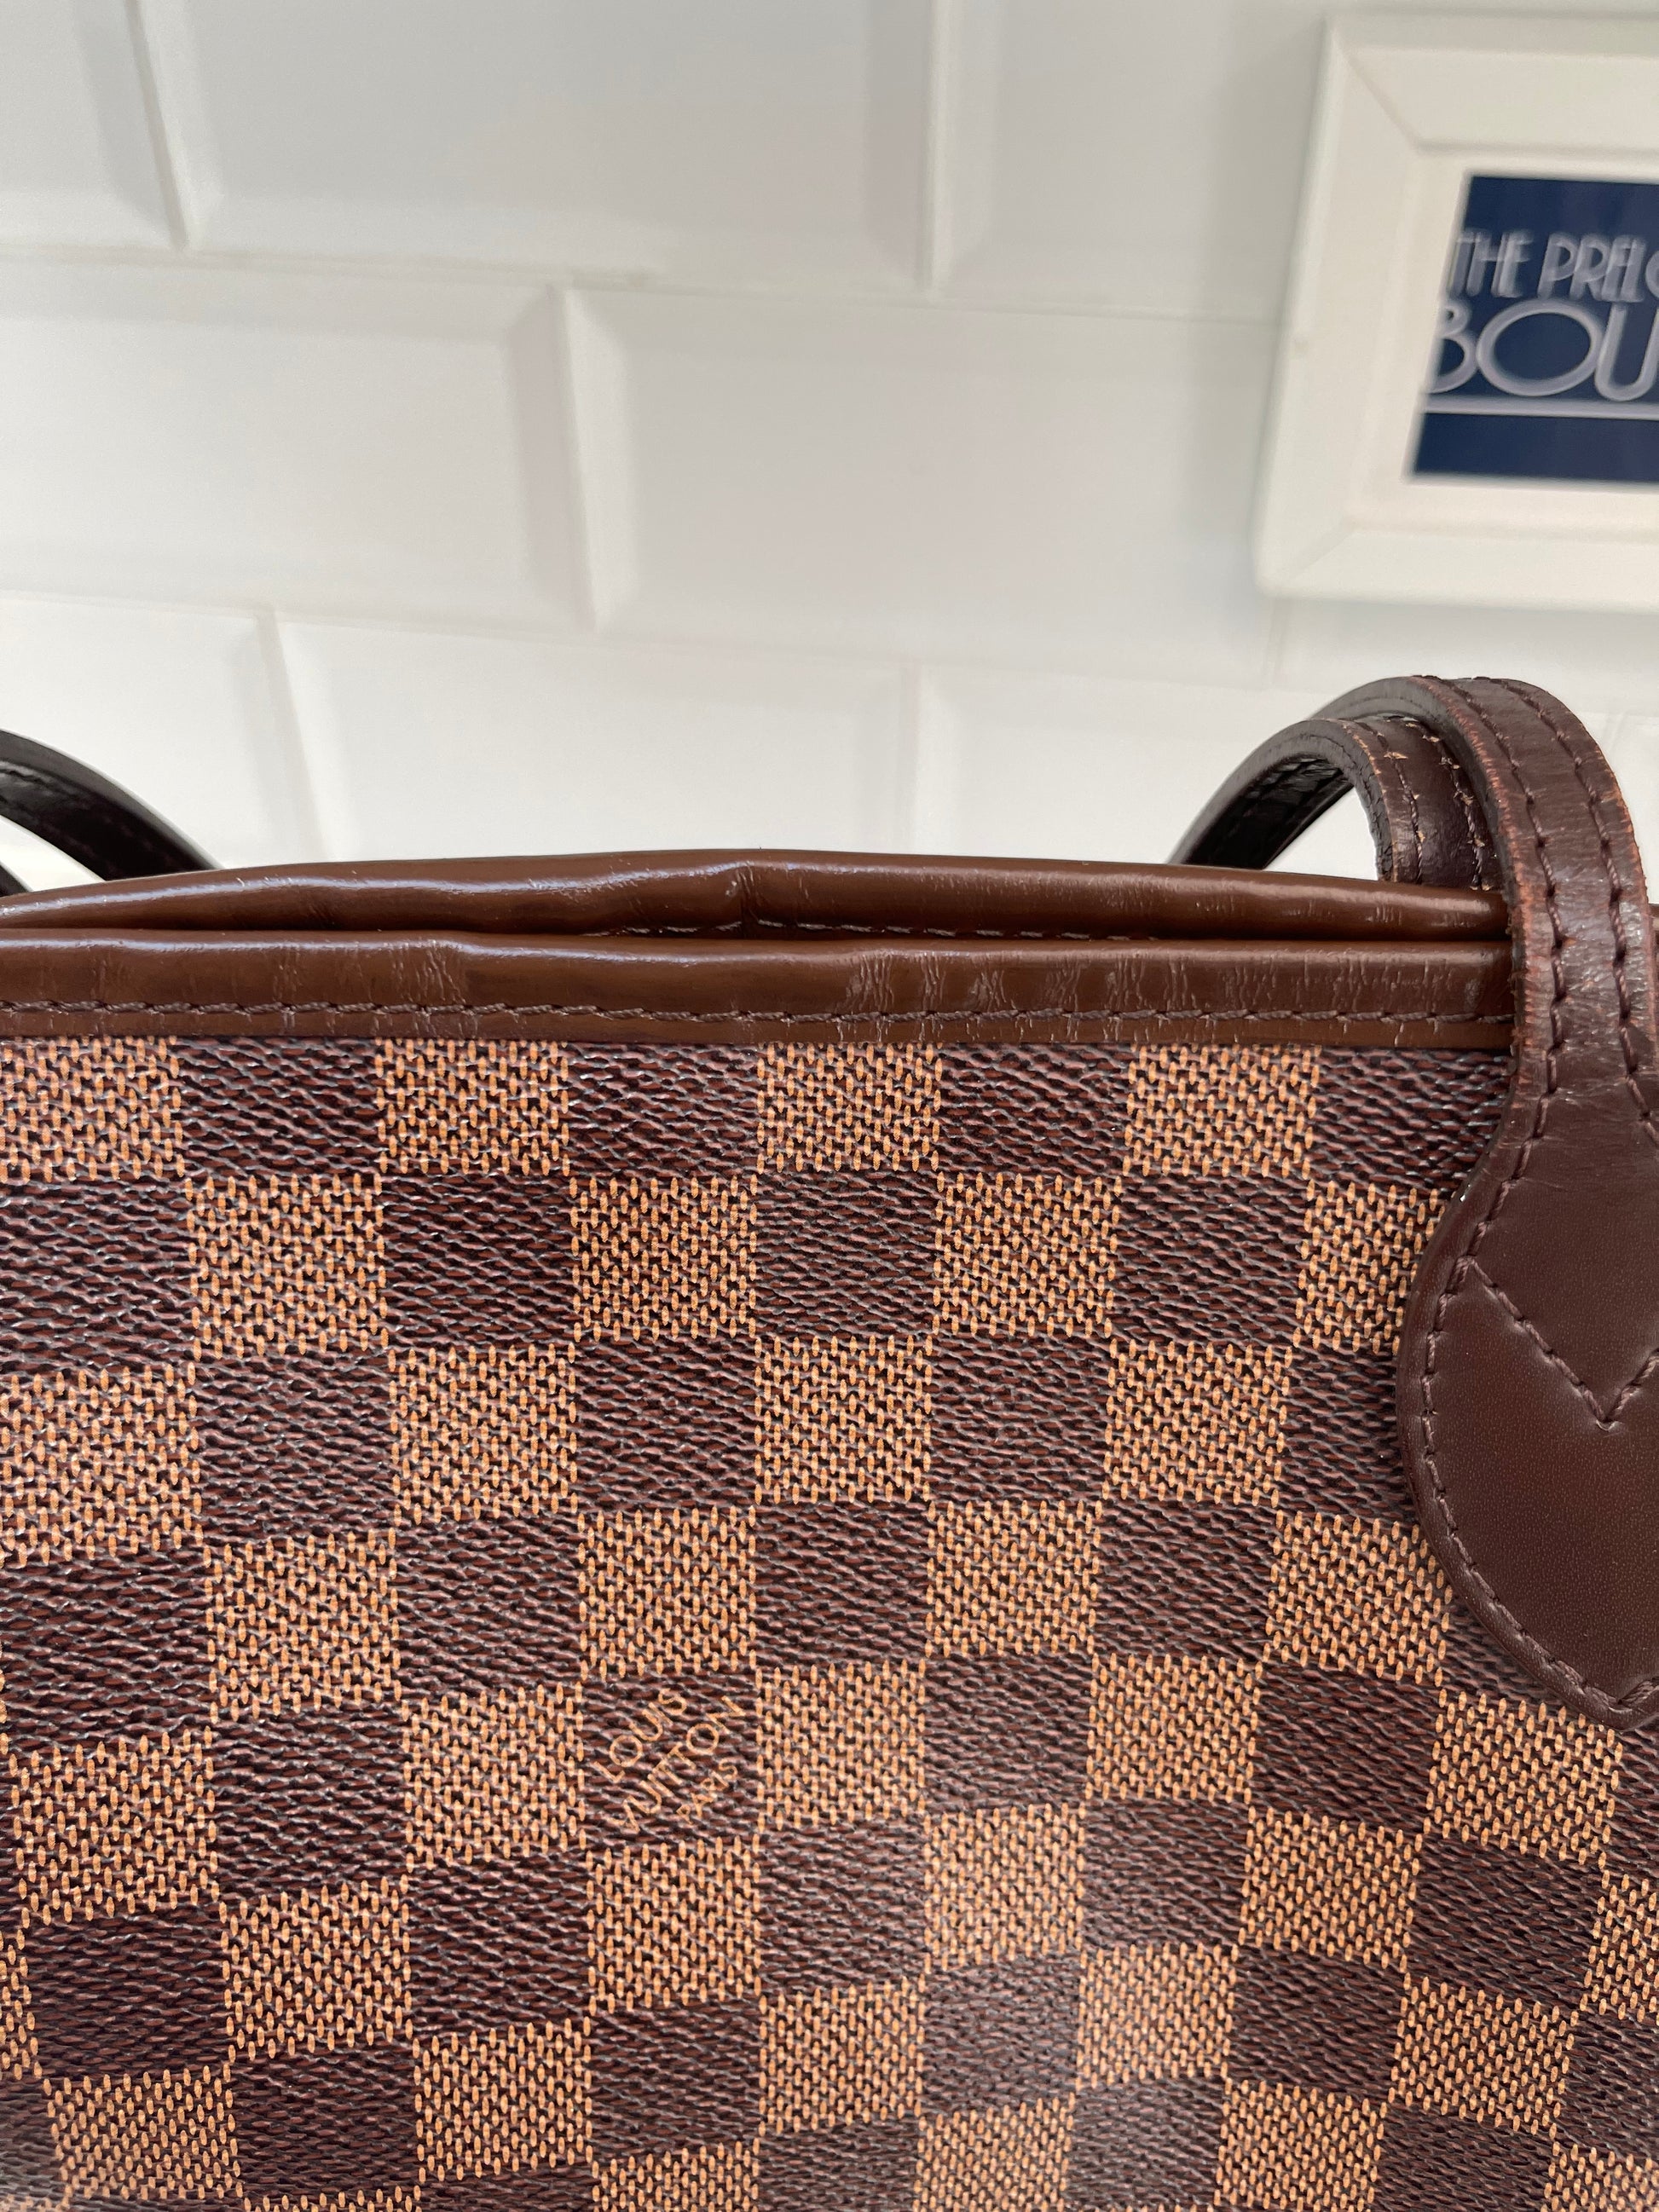 Louis Vuitton Neverfull Patches MM Damier Ebene Tote Bag Brown